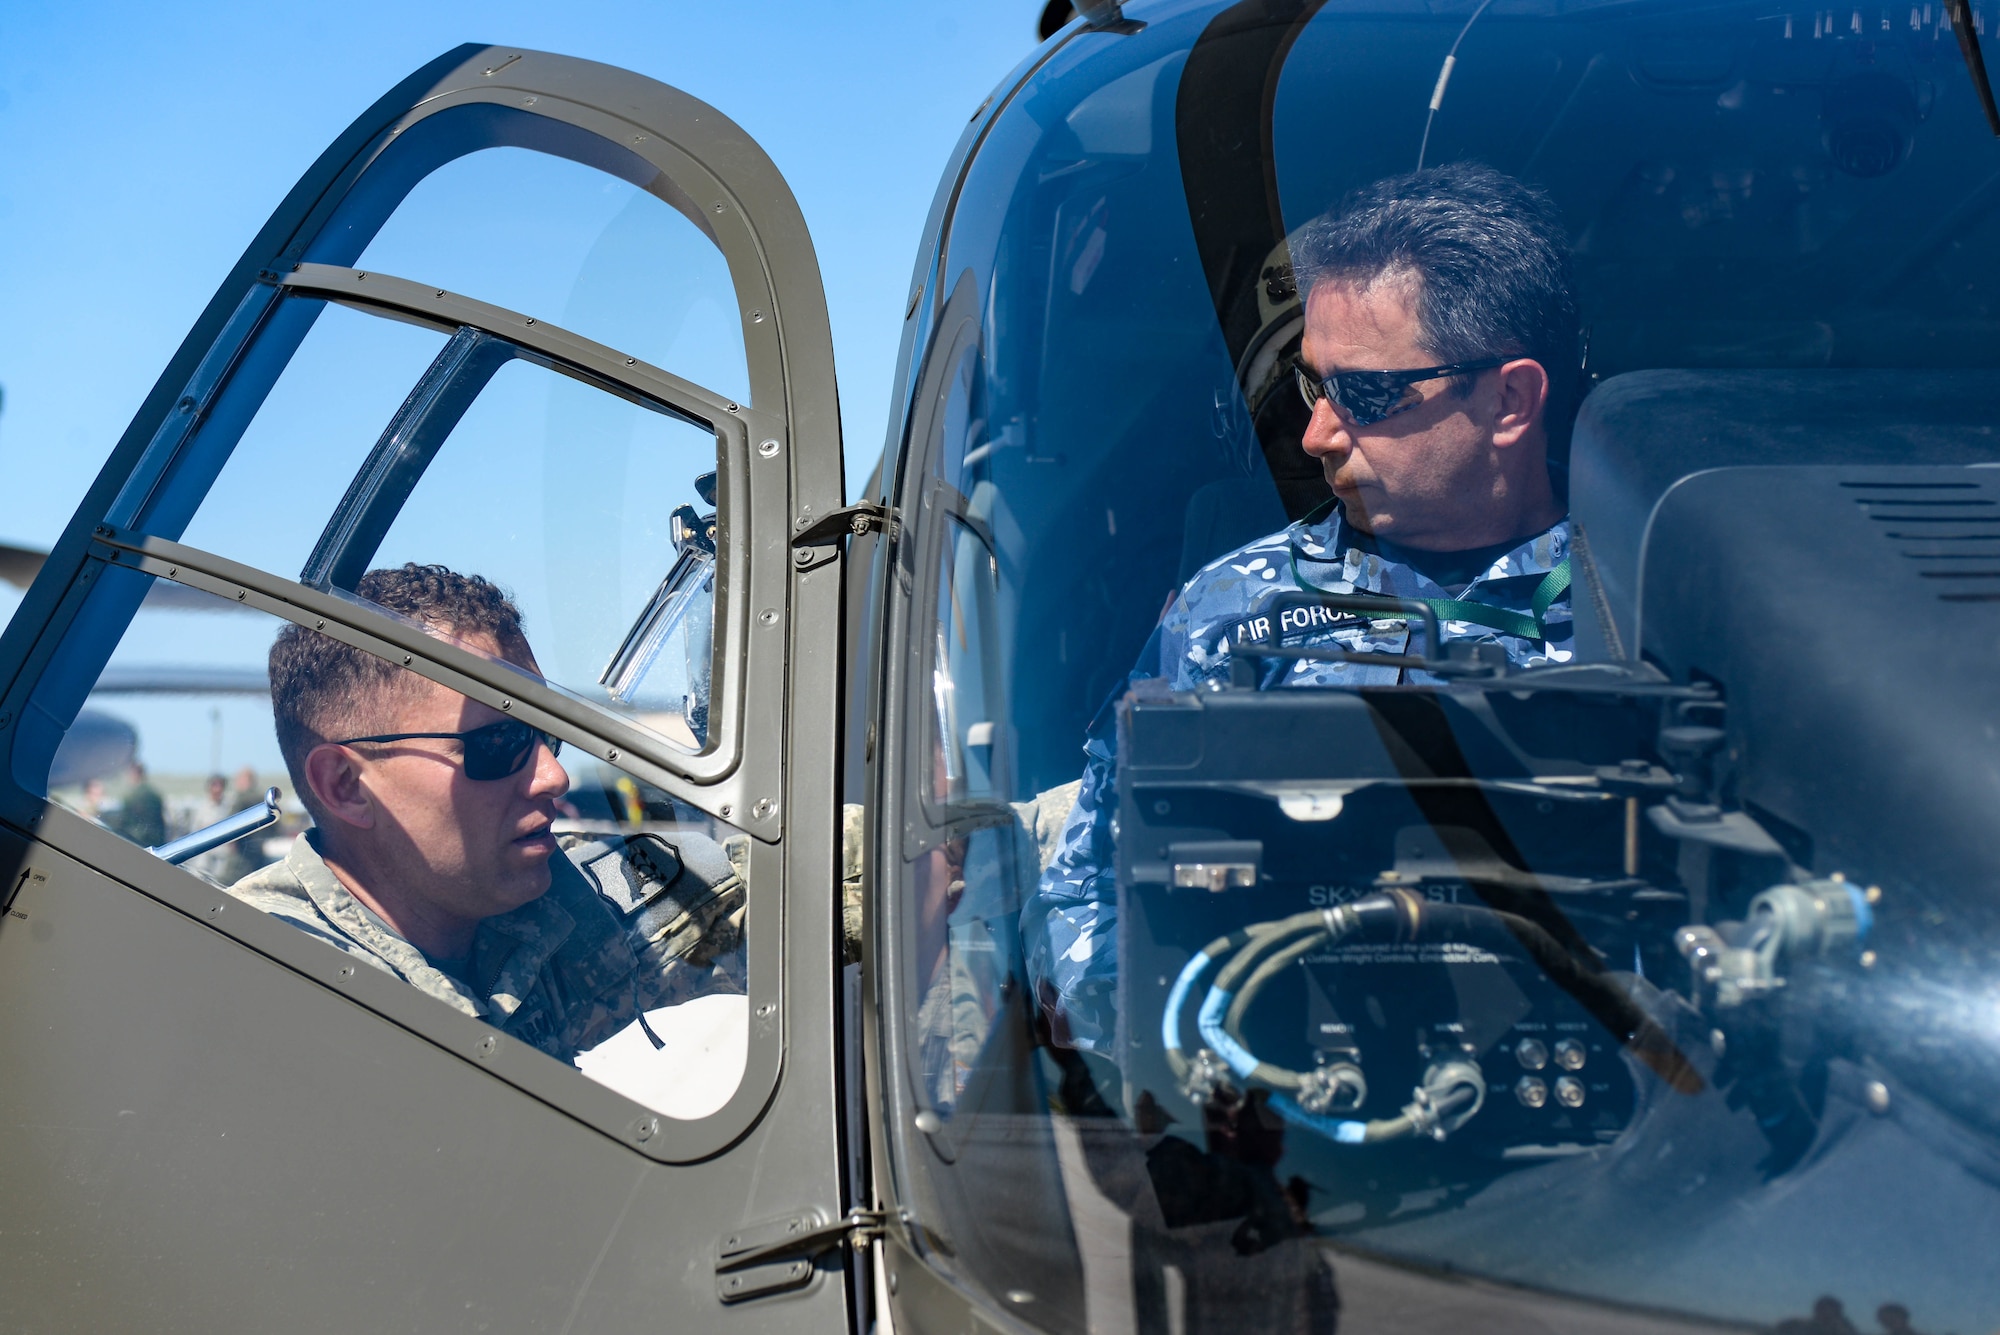 U.S. Army Chief Warrant Officer 2 Rory McCarthy, a pilot assigned to Detachment 1, 1-112th Aviation Regiment, speaks with a foreign defense attaché about the UH-72 Lakota during a tour at Ellsworth Air Force Base, S.D., Sept. 4, 2019. Approximately 45 defense attachés from several different countries visited the base to learn more about the mission of the 28th Bomb Wing and the 89th Attack Squadron.  They toured statics of munitions; a B-1B Lancer, assigned to the 37th Bomb Squadron; and a UH-72, which was provided by the South Dakota National Guard. (U.S. Air Force photo by Tech. Sgt. Jette Carr)